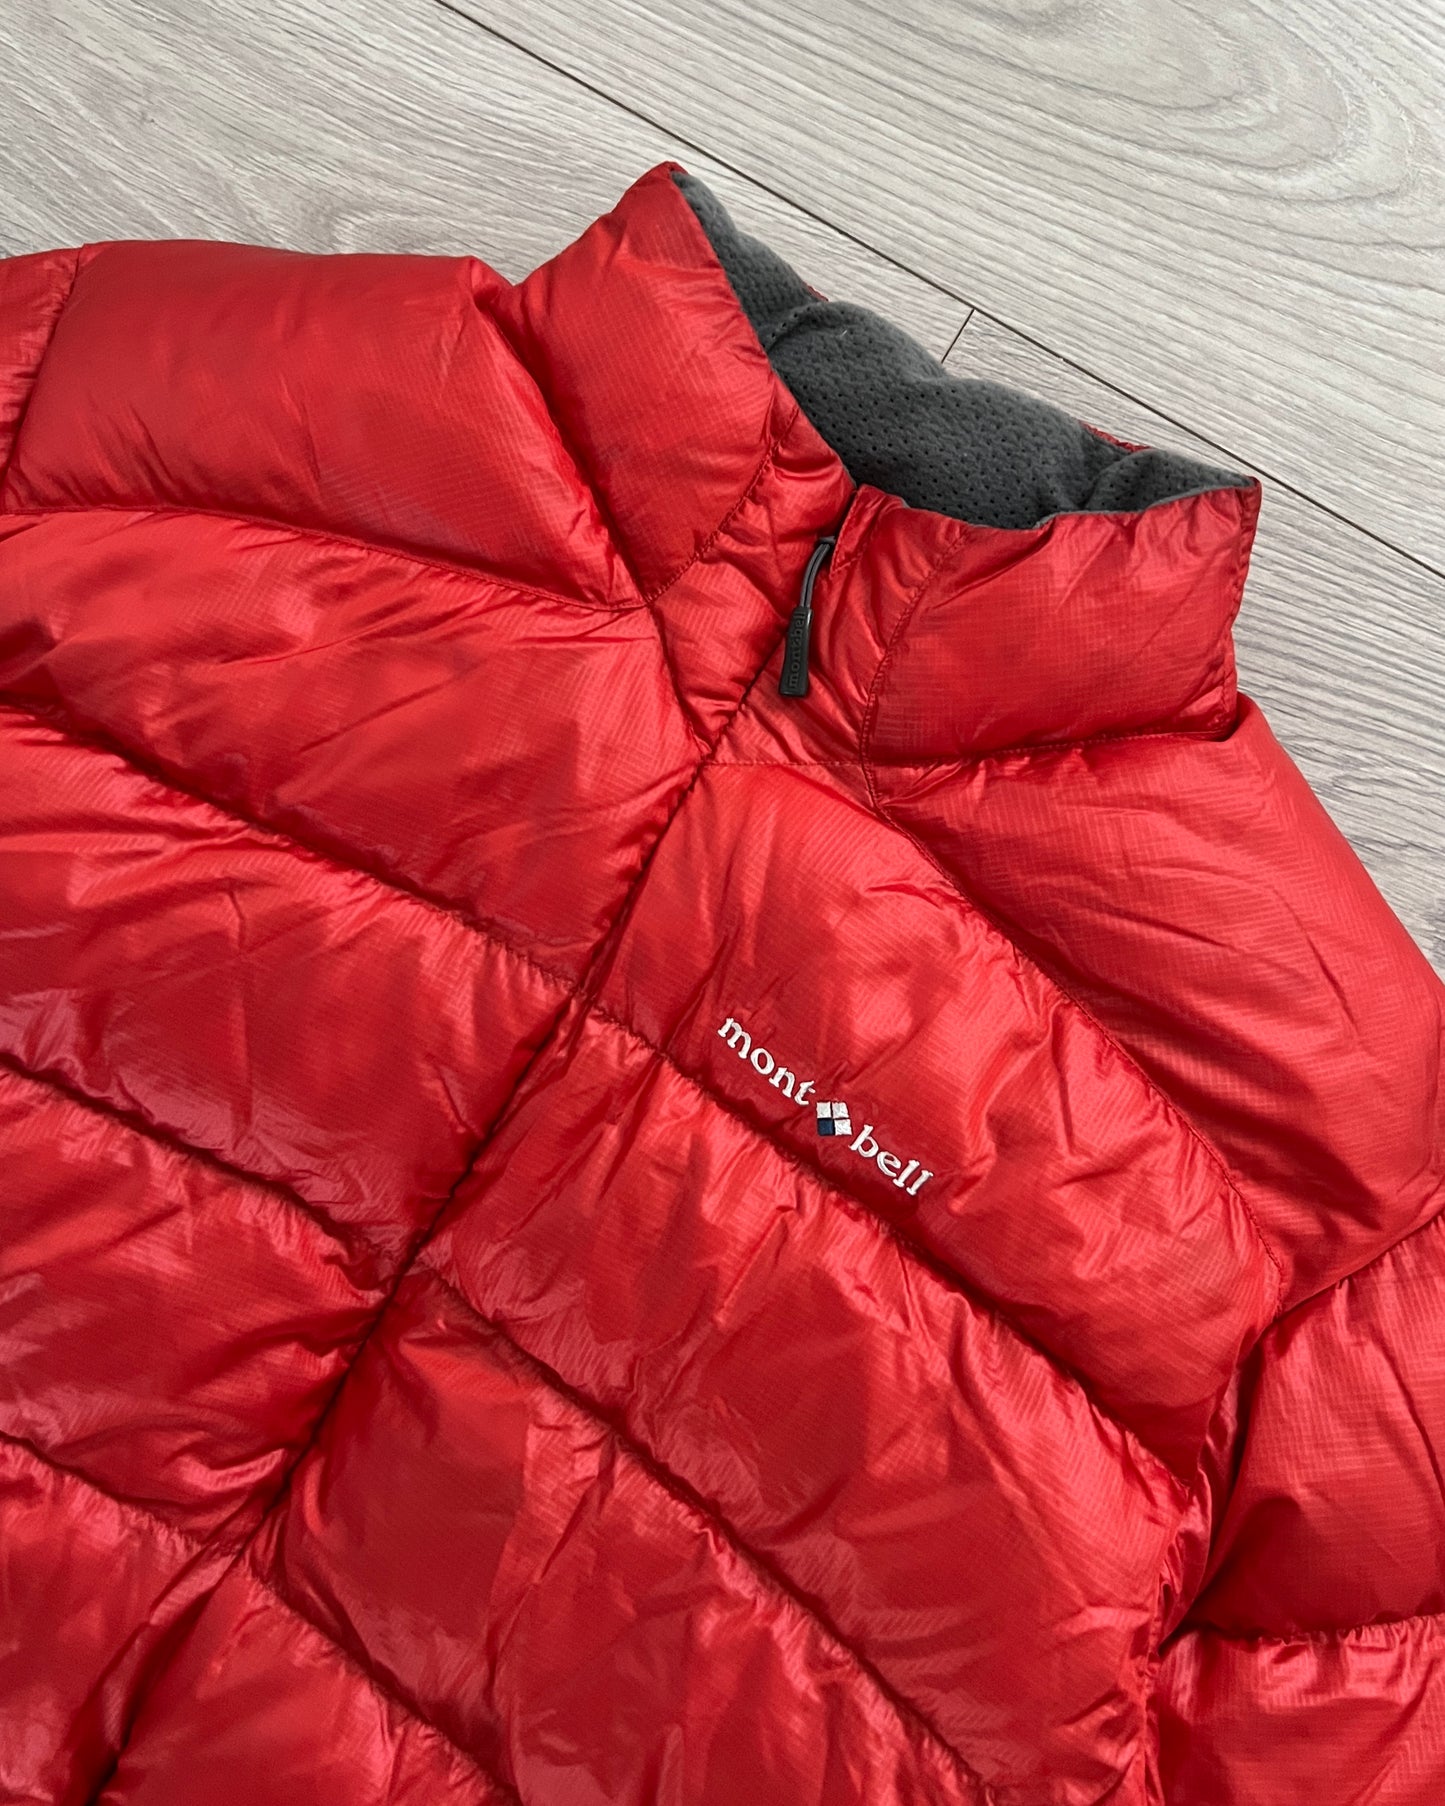 Montbell 2000s Goose Down Nylon Puffer Jacket - Size M